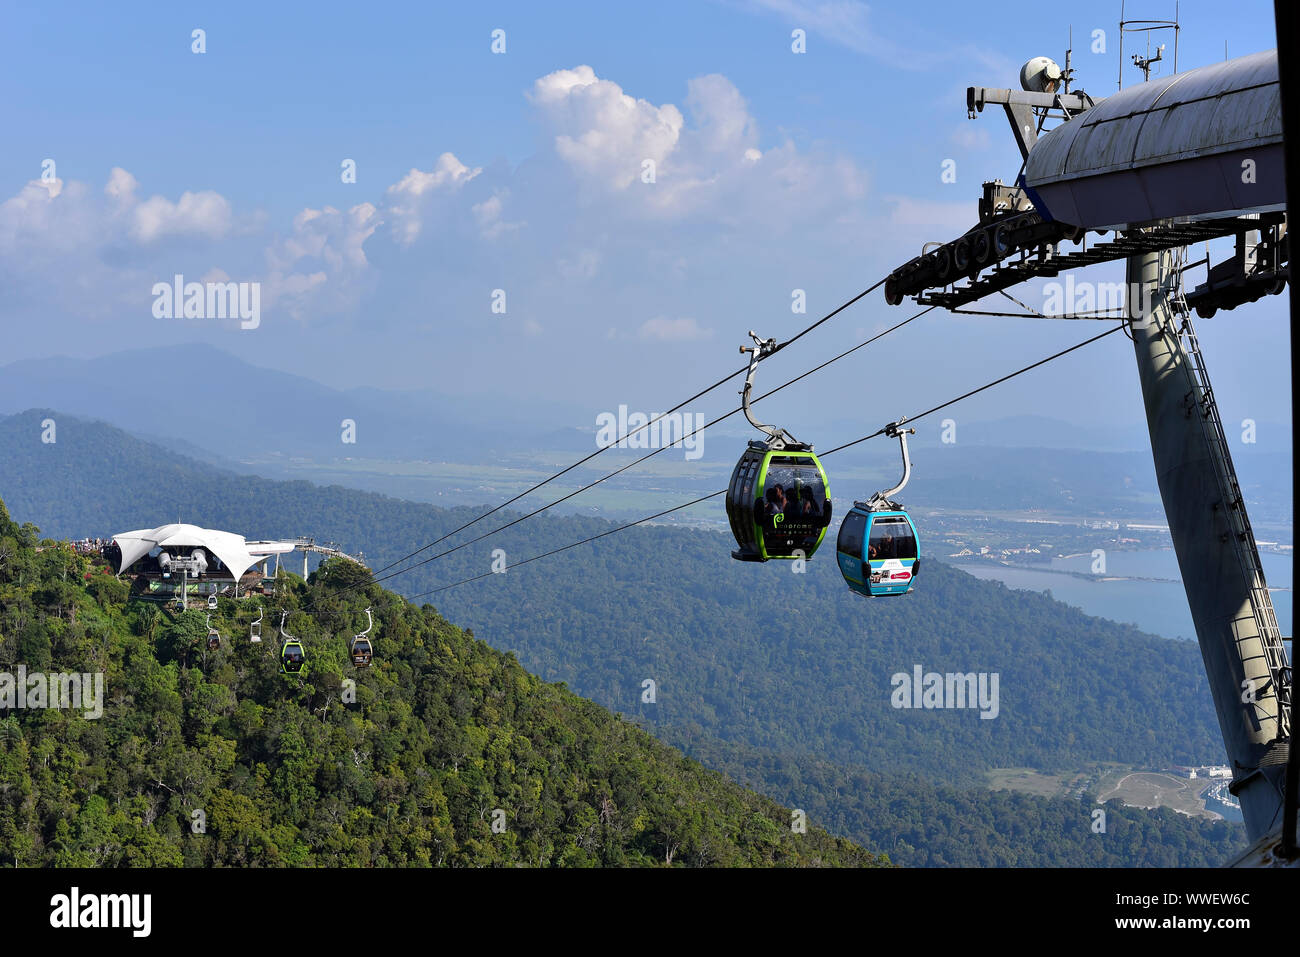 Langkawi Island, Malaysia - Dec 23, 2018: The Langkawi Cable Car, also known as Langkawi SkyCab transporting passengers to top Machincang mountain and Stock Photo